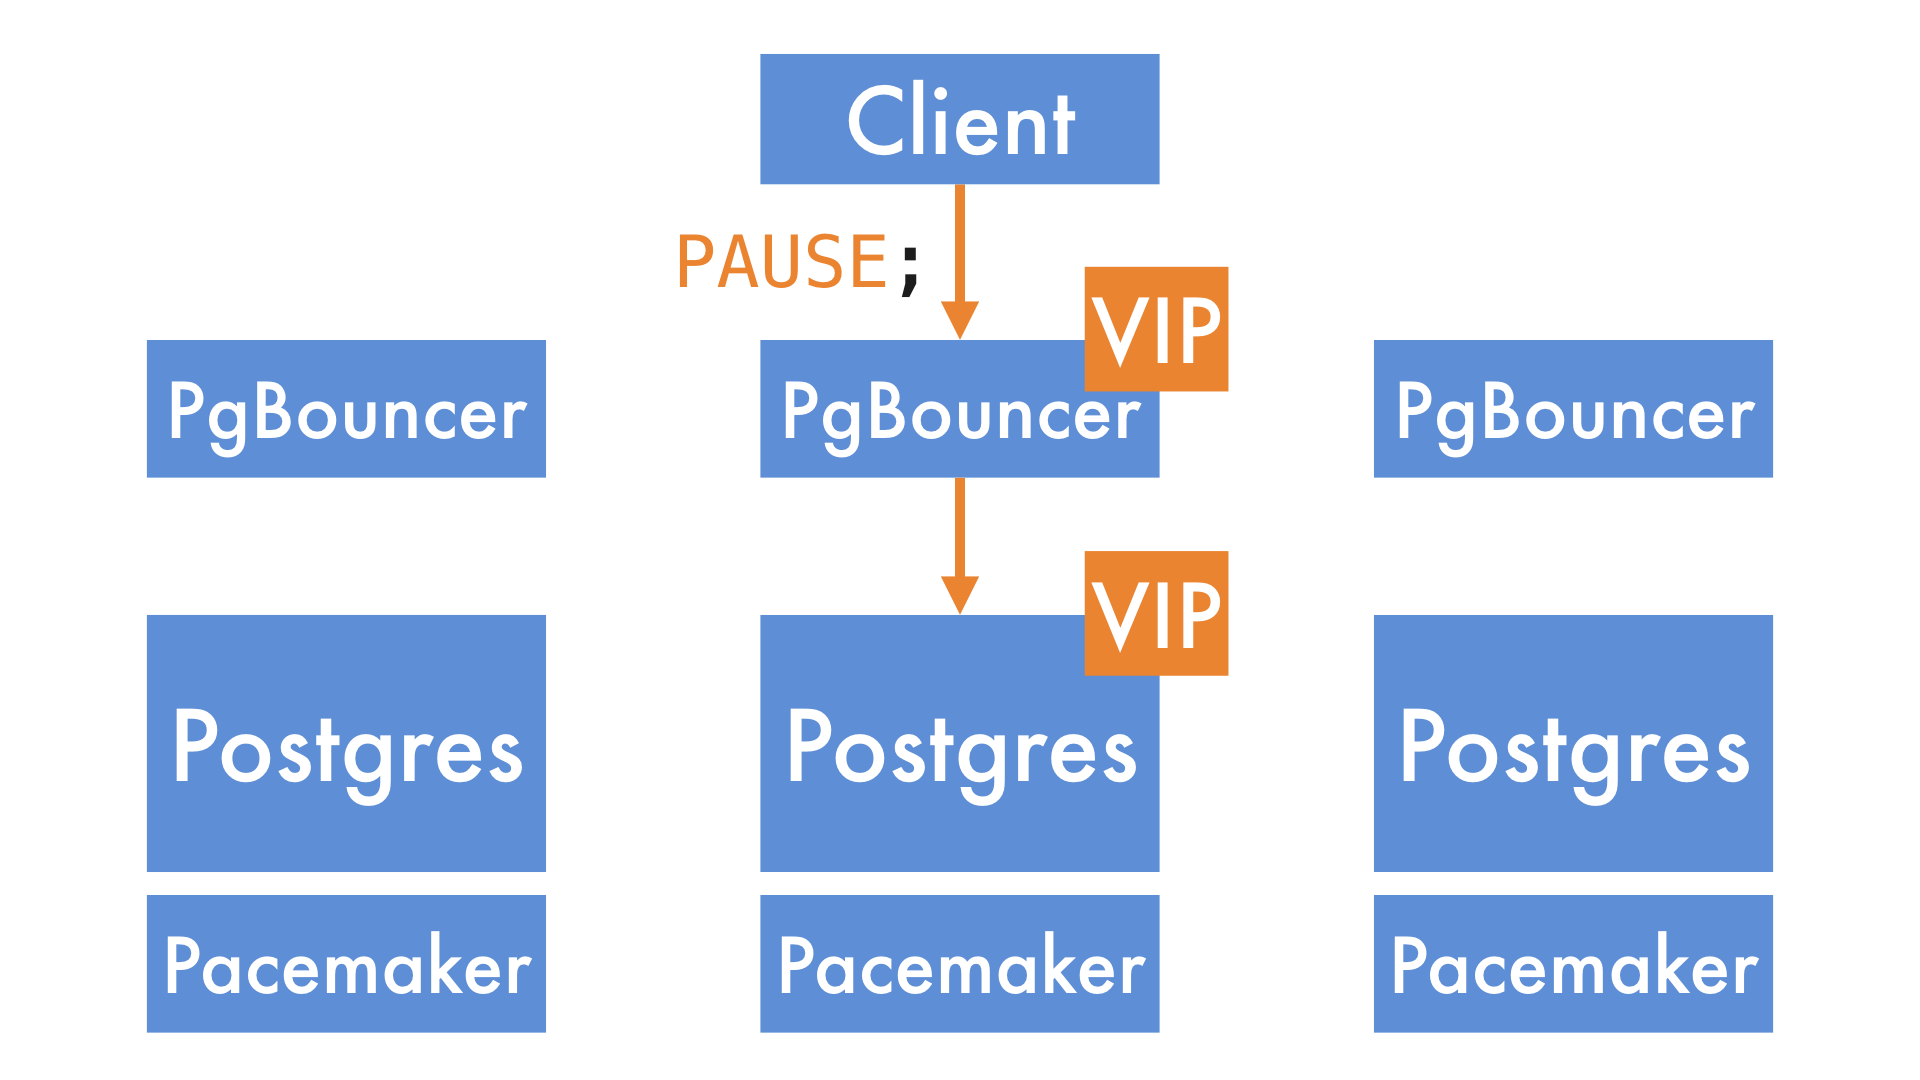 blog > images > postgres-outage-oct-2017 > pgbouncer-intro > pgbouncer-pause.png